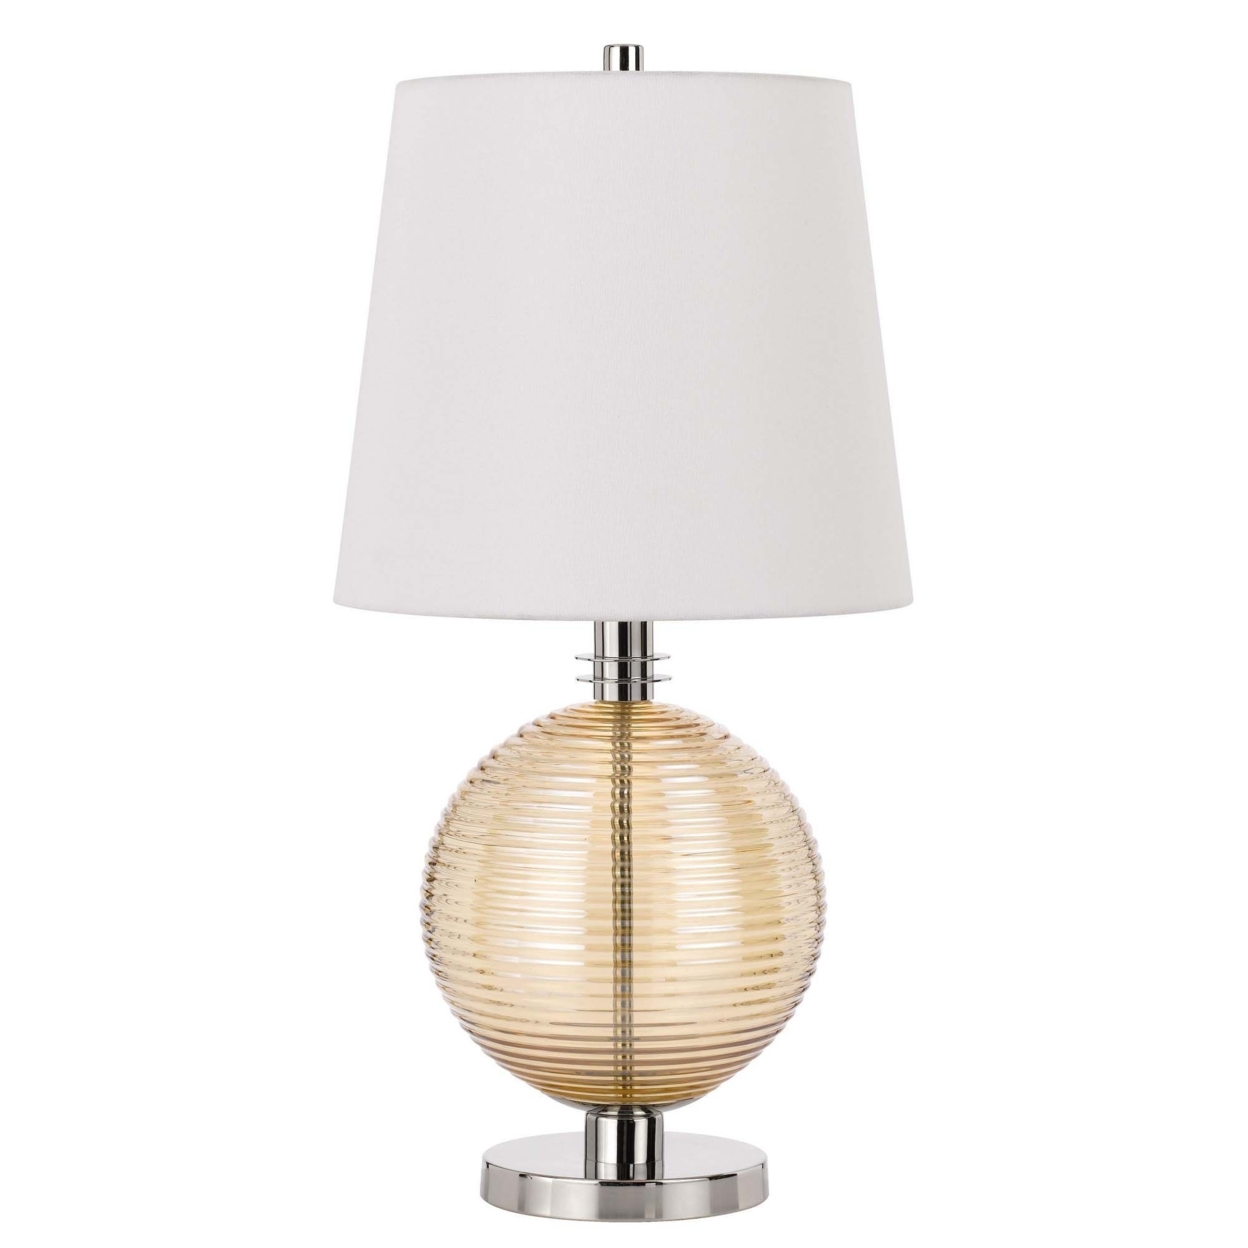 Table Lamp With Textured Glass Ball Accent, White And Chrome- Saltoro Sherpi